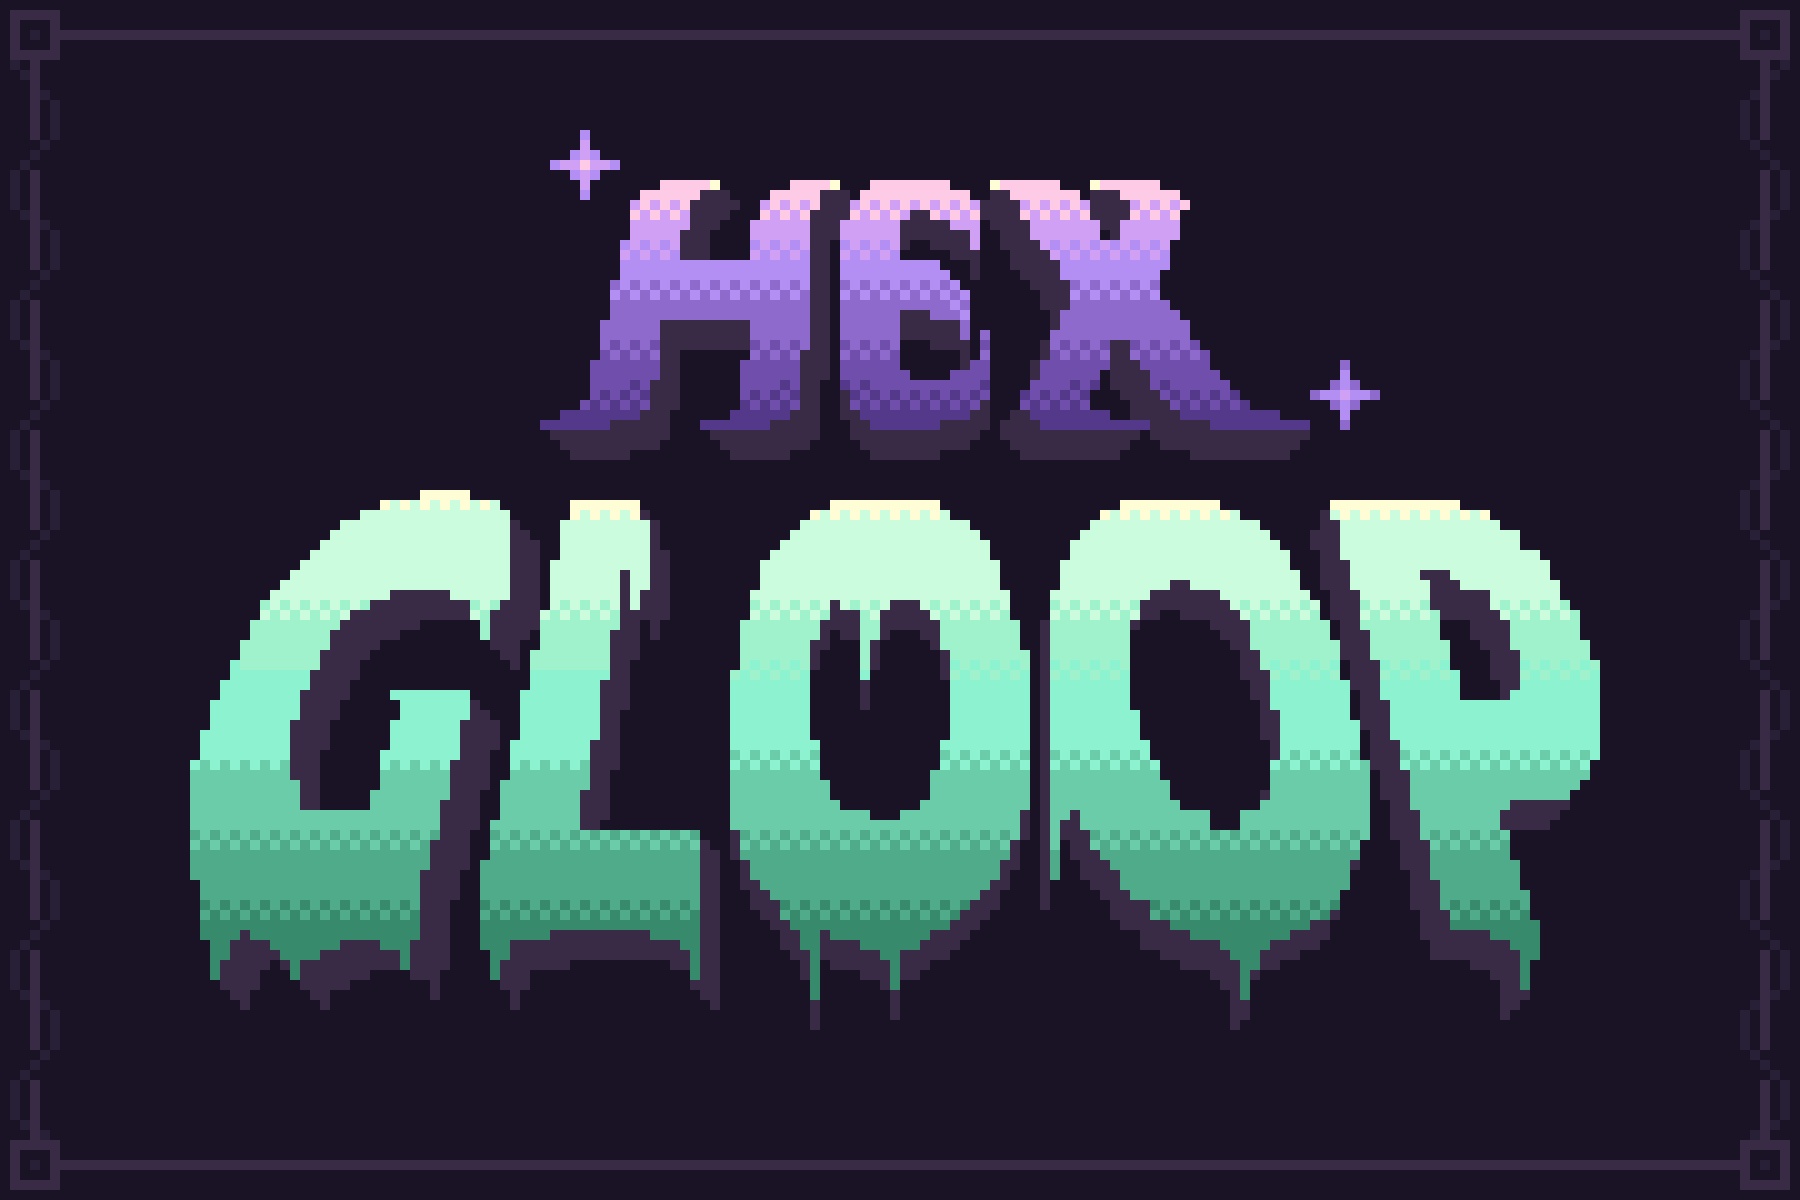 Hex Gloop Title Card. Reads Hex Gloop on two lines. Hex is in a magic looking purple style with stars around it and Gloop is in a green slimey style.